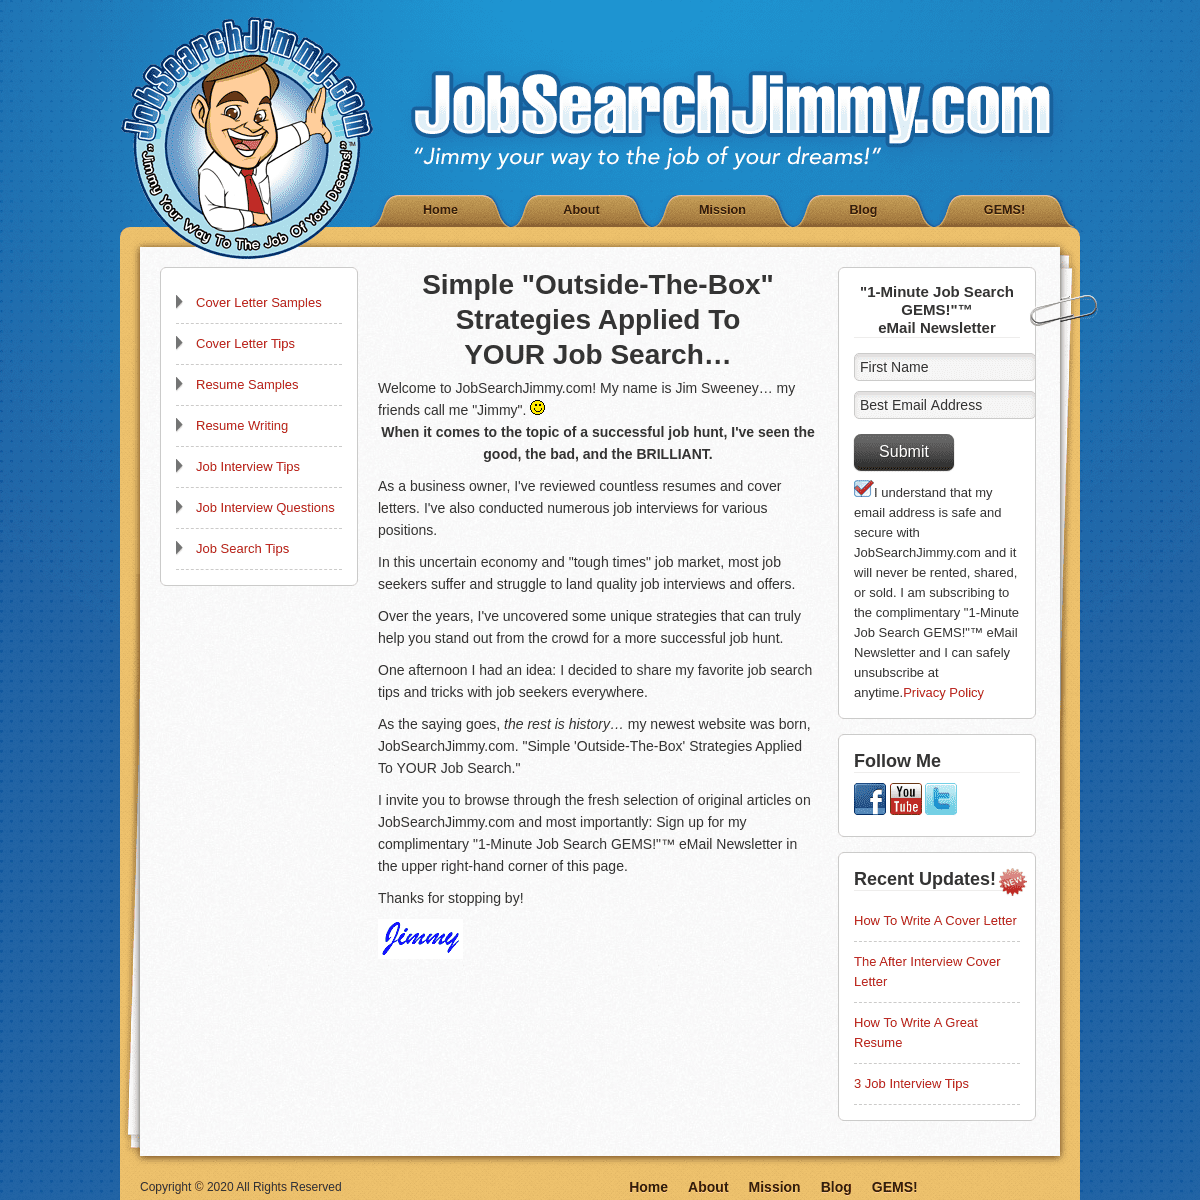 A complete backup of jobsearchjimmy.com